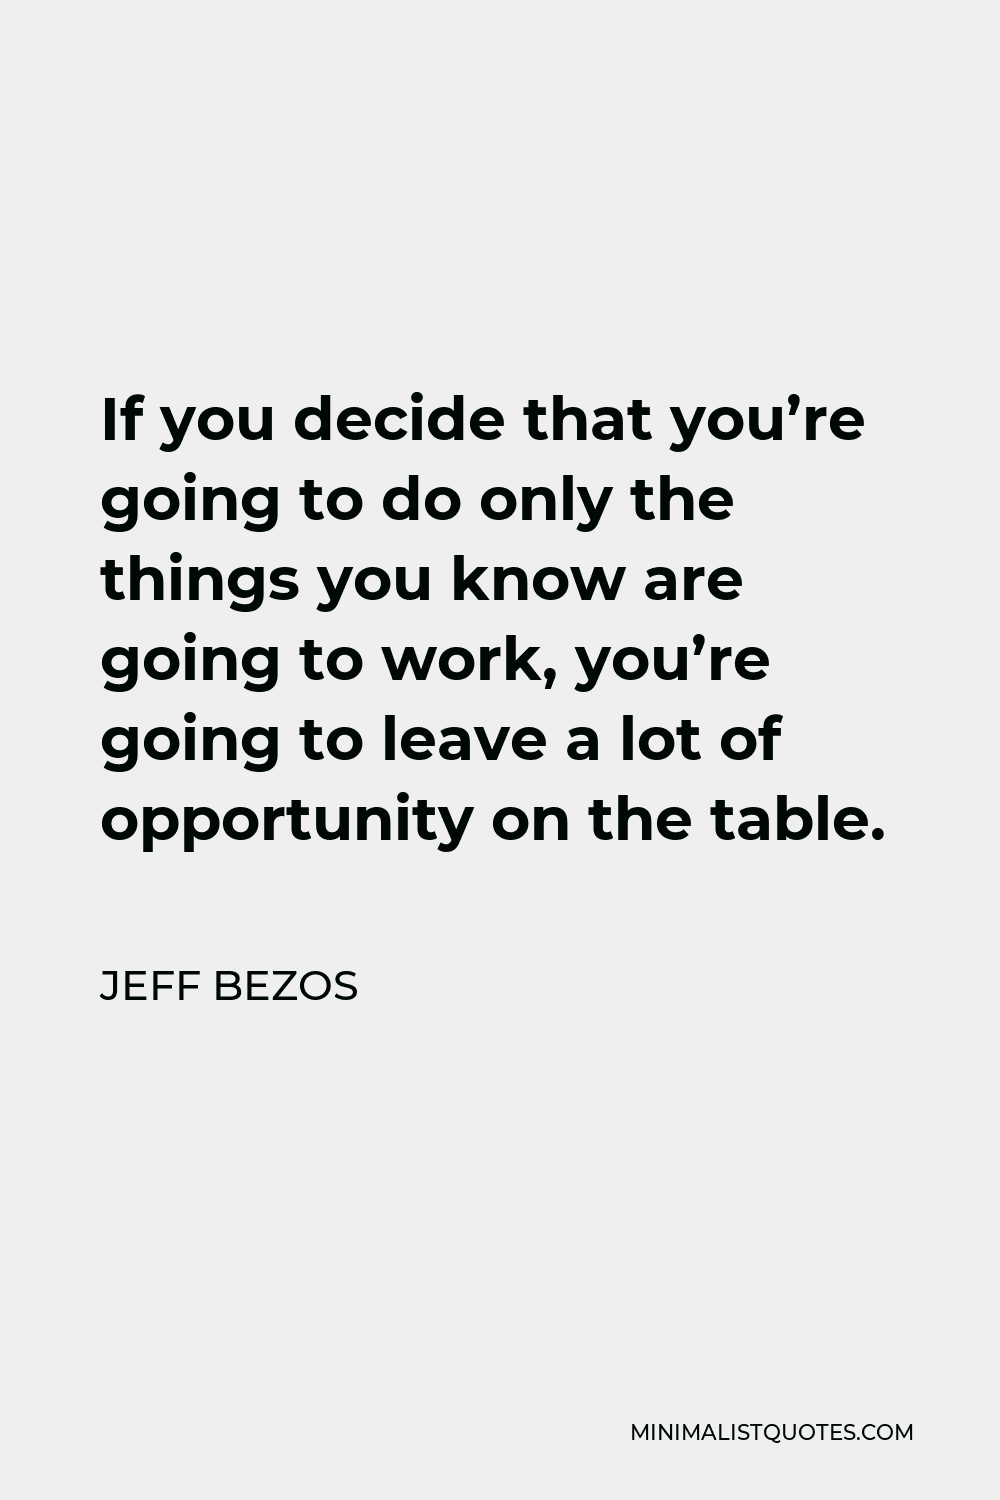 Jeff Bezos Quote - If you decide that you’re going to do only the things you know are going to work, you’re going to leave a lot of opportunity on the table.